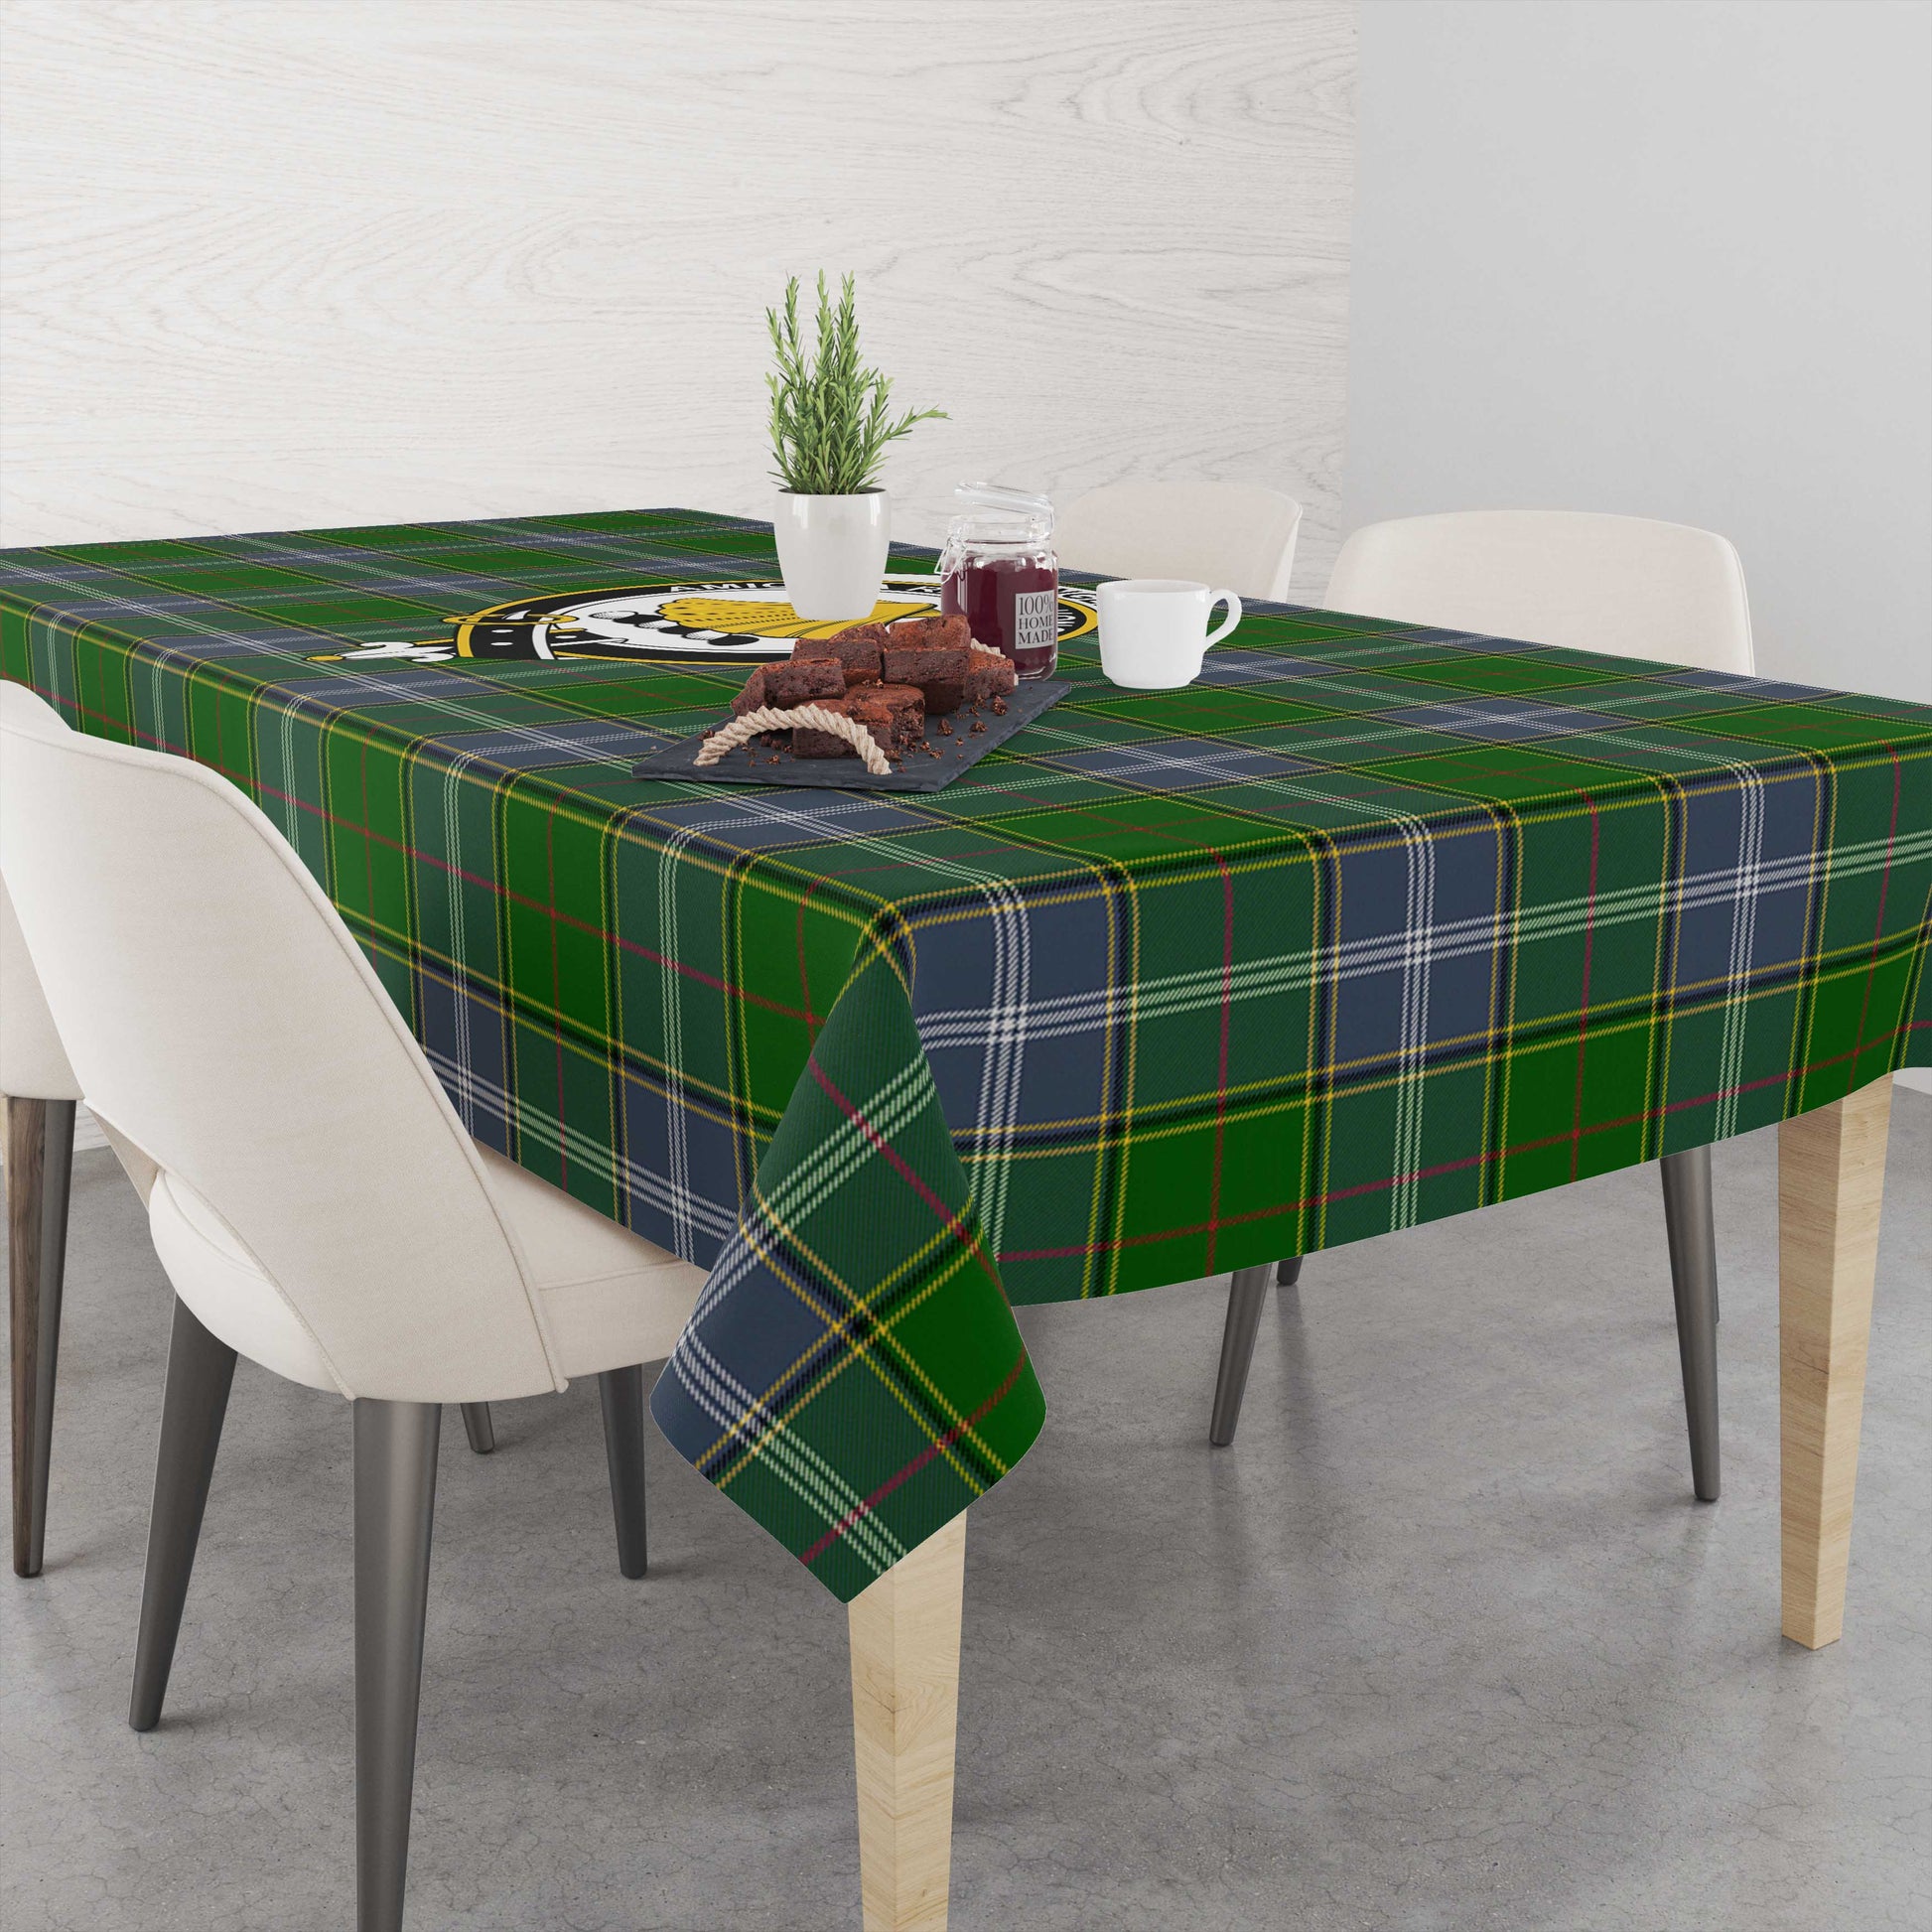 pringle-tatan-tablecloth-with-family-crest